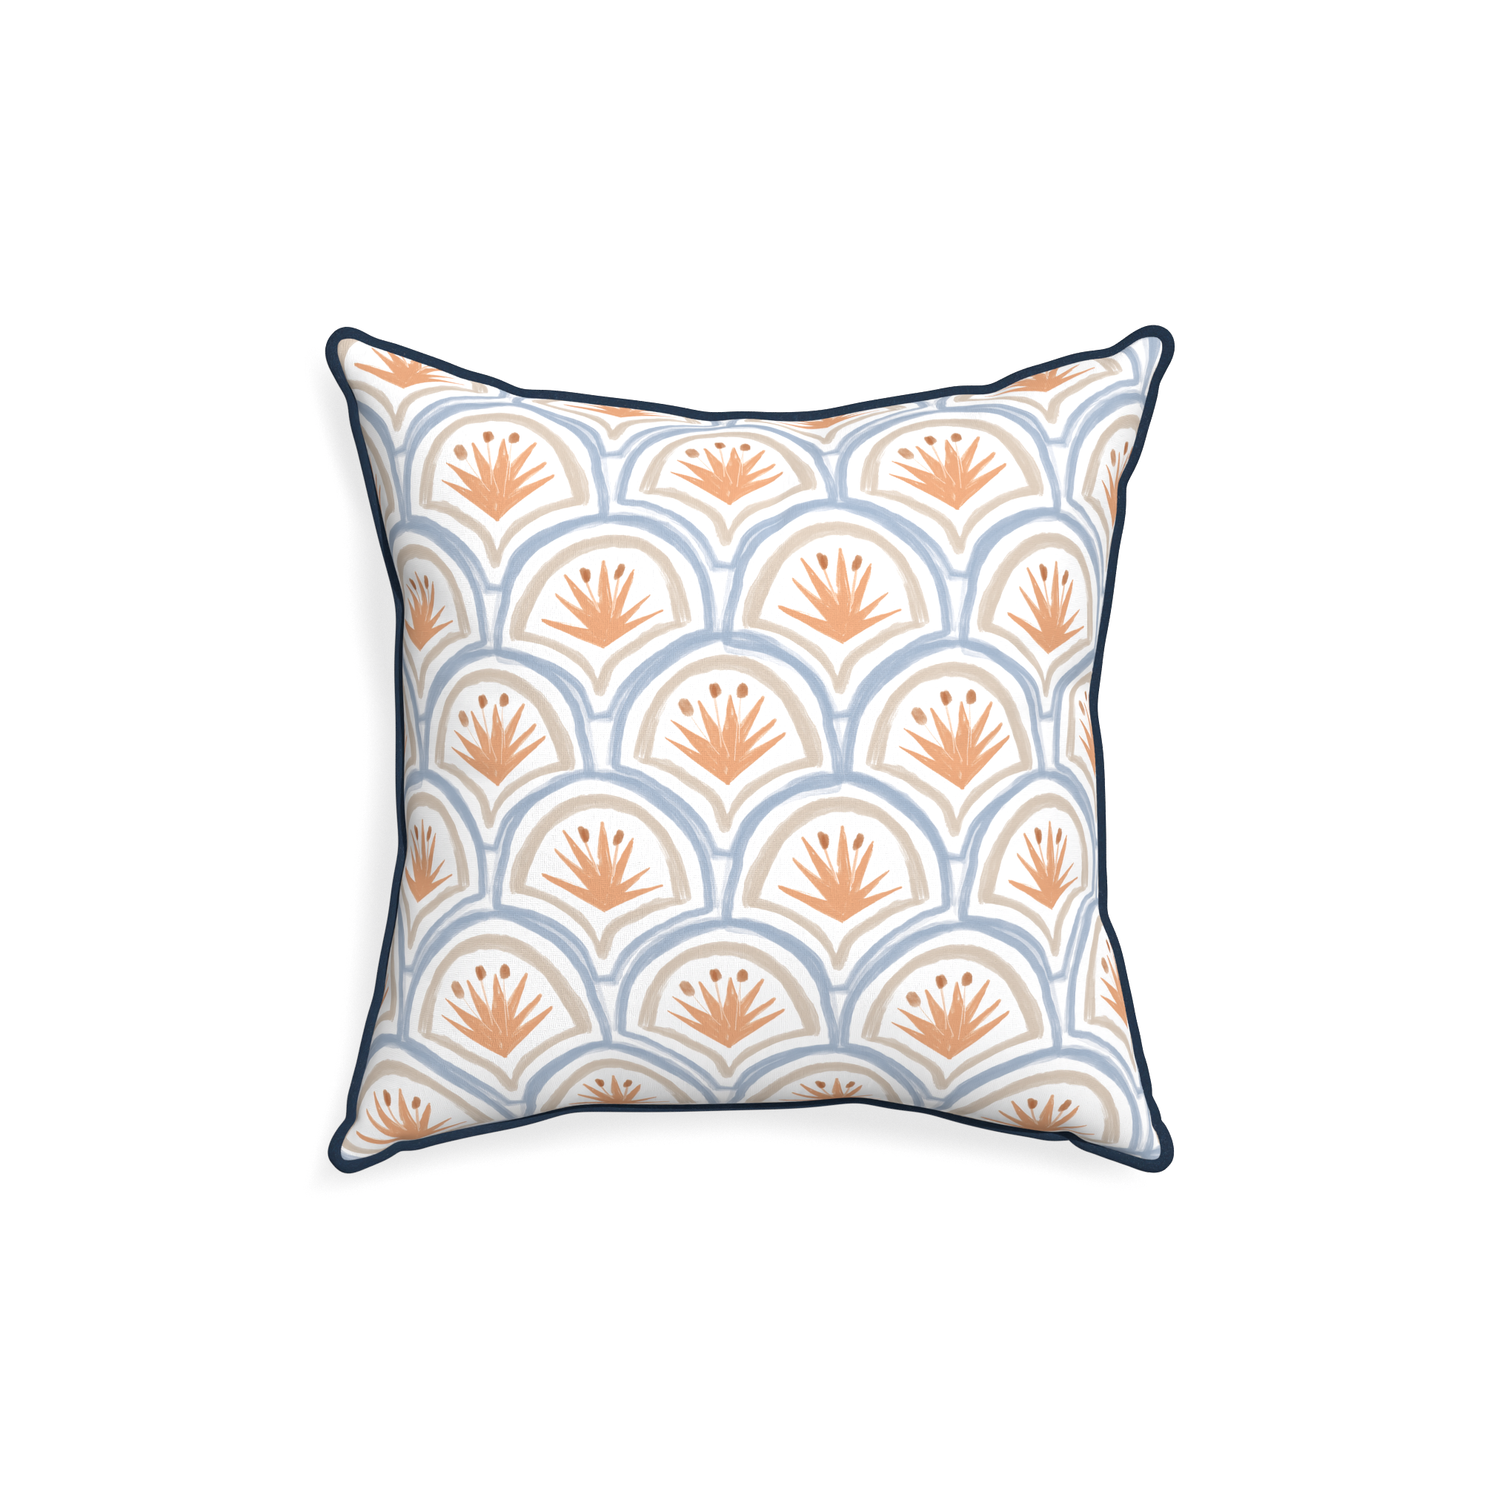 18-square thatcher apricot custom art deco palm patternpillow with c piping on white background